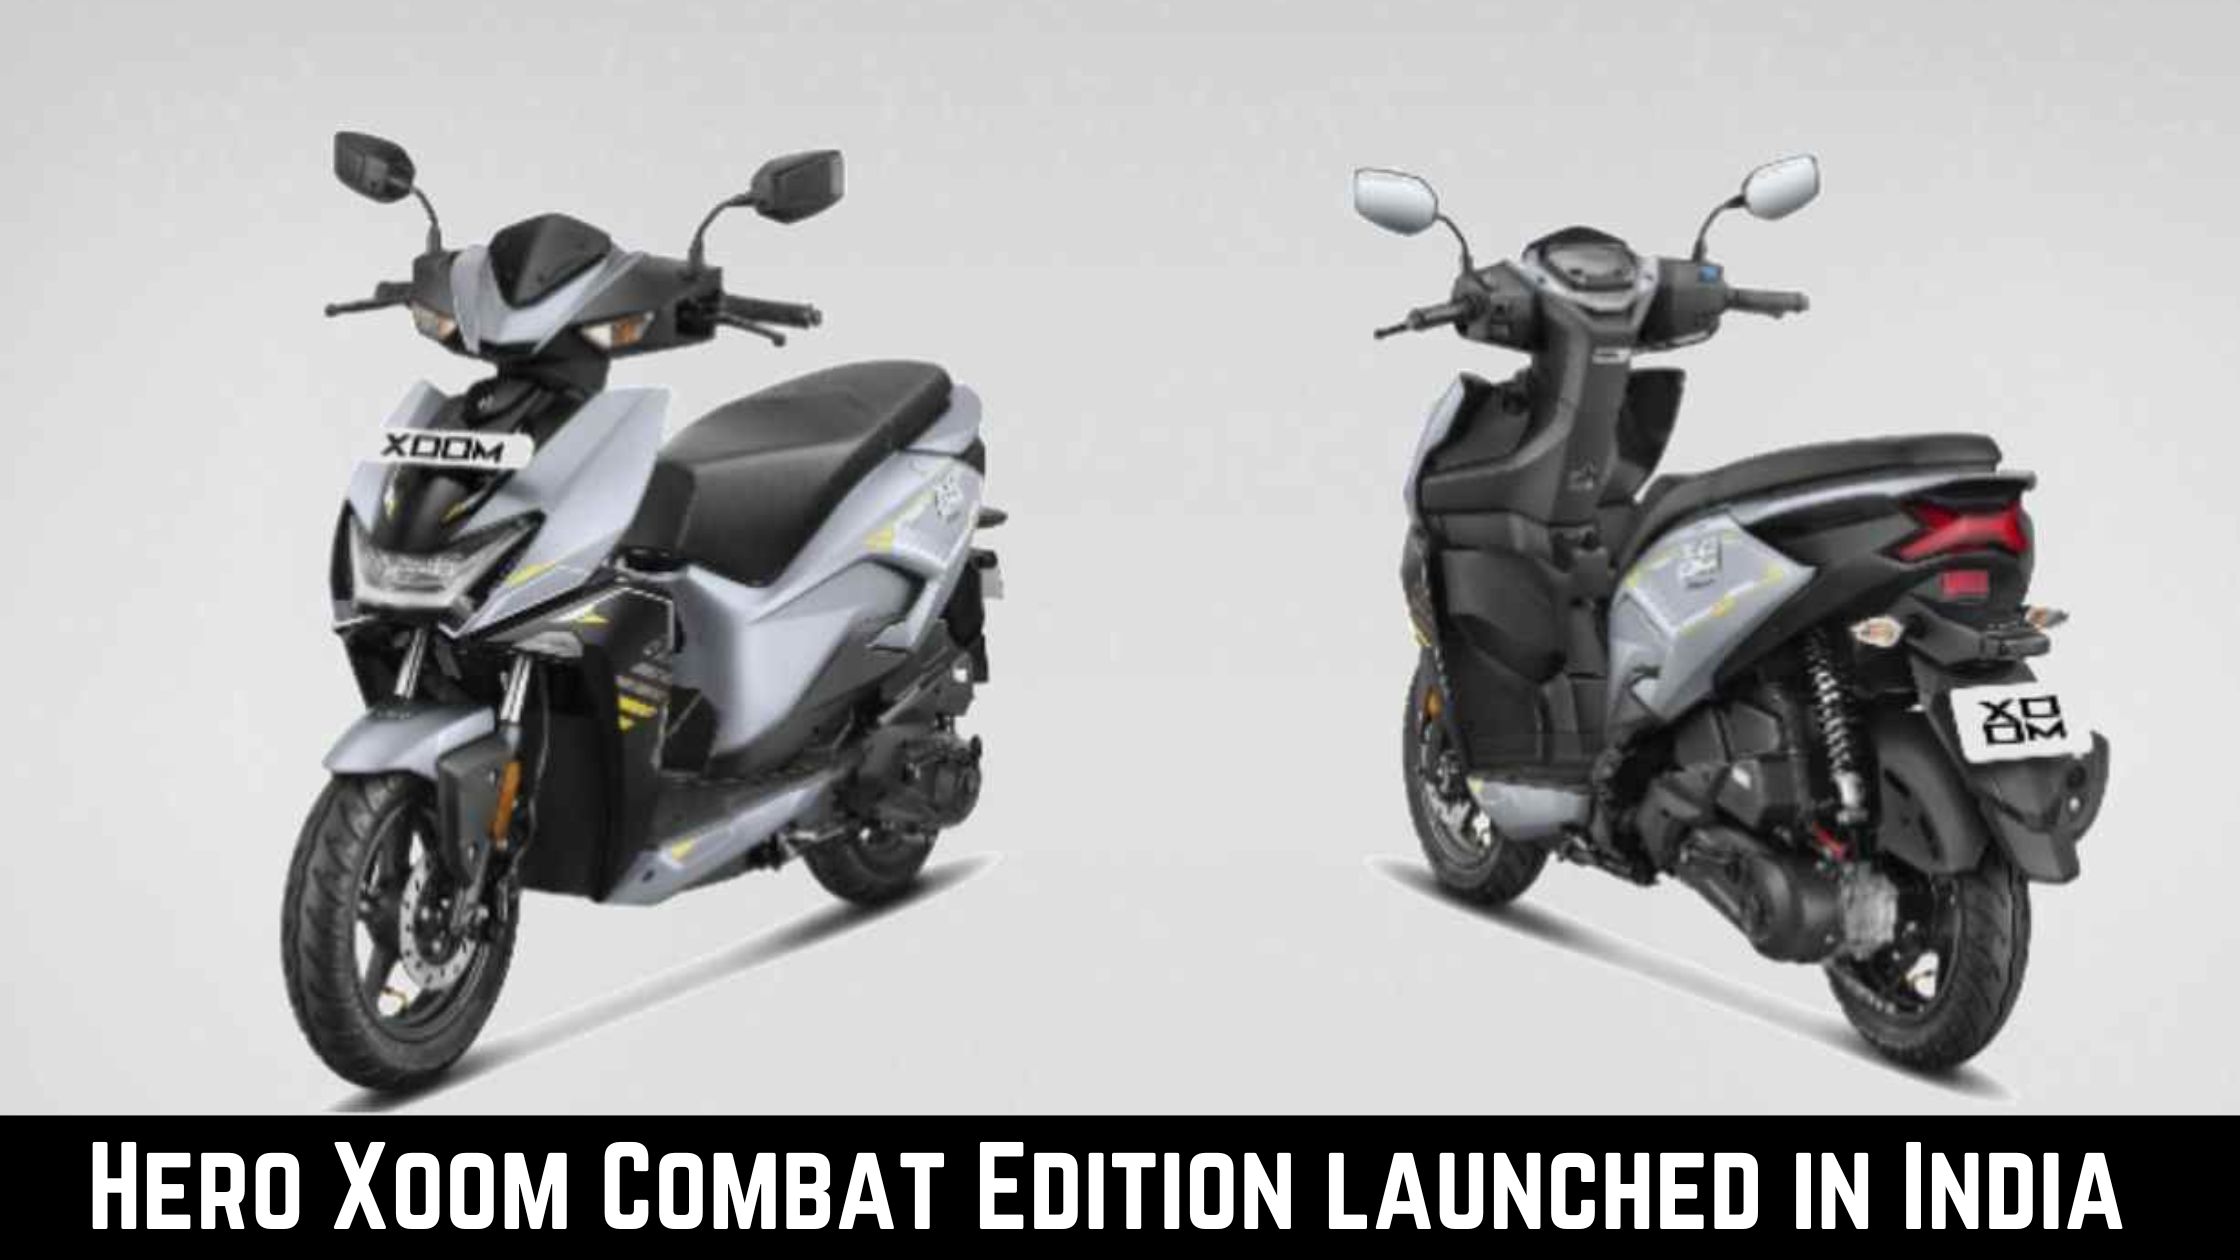 Hero Xoom Combat Edition launched in India